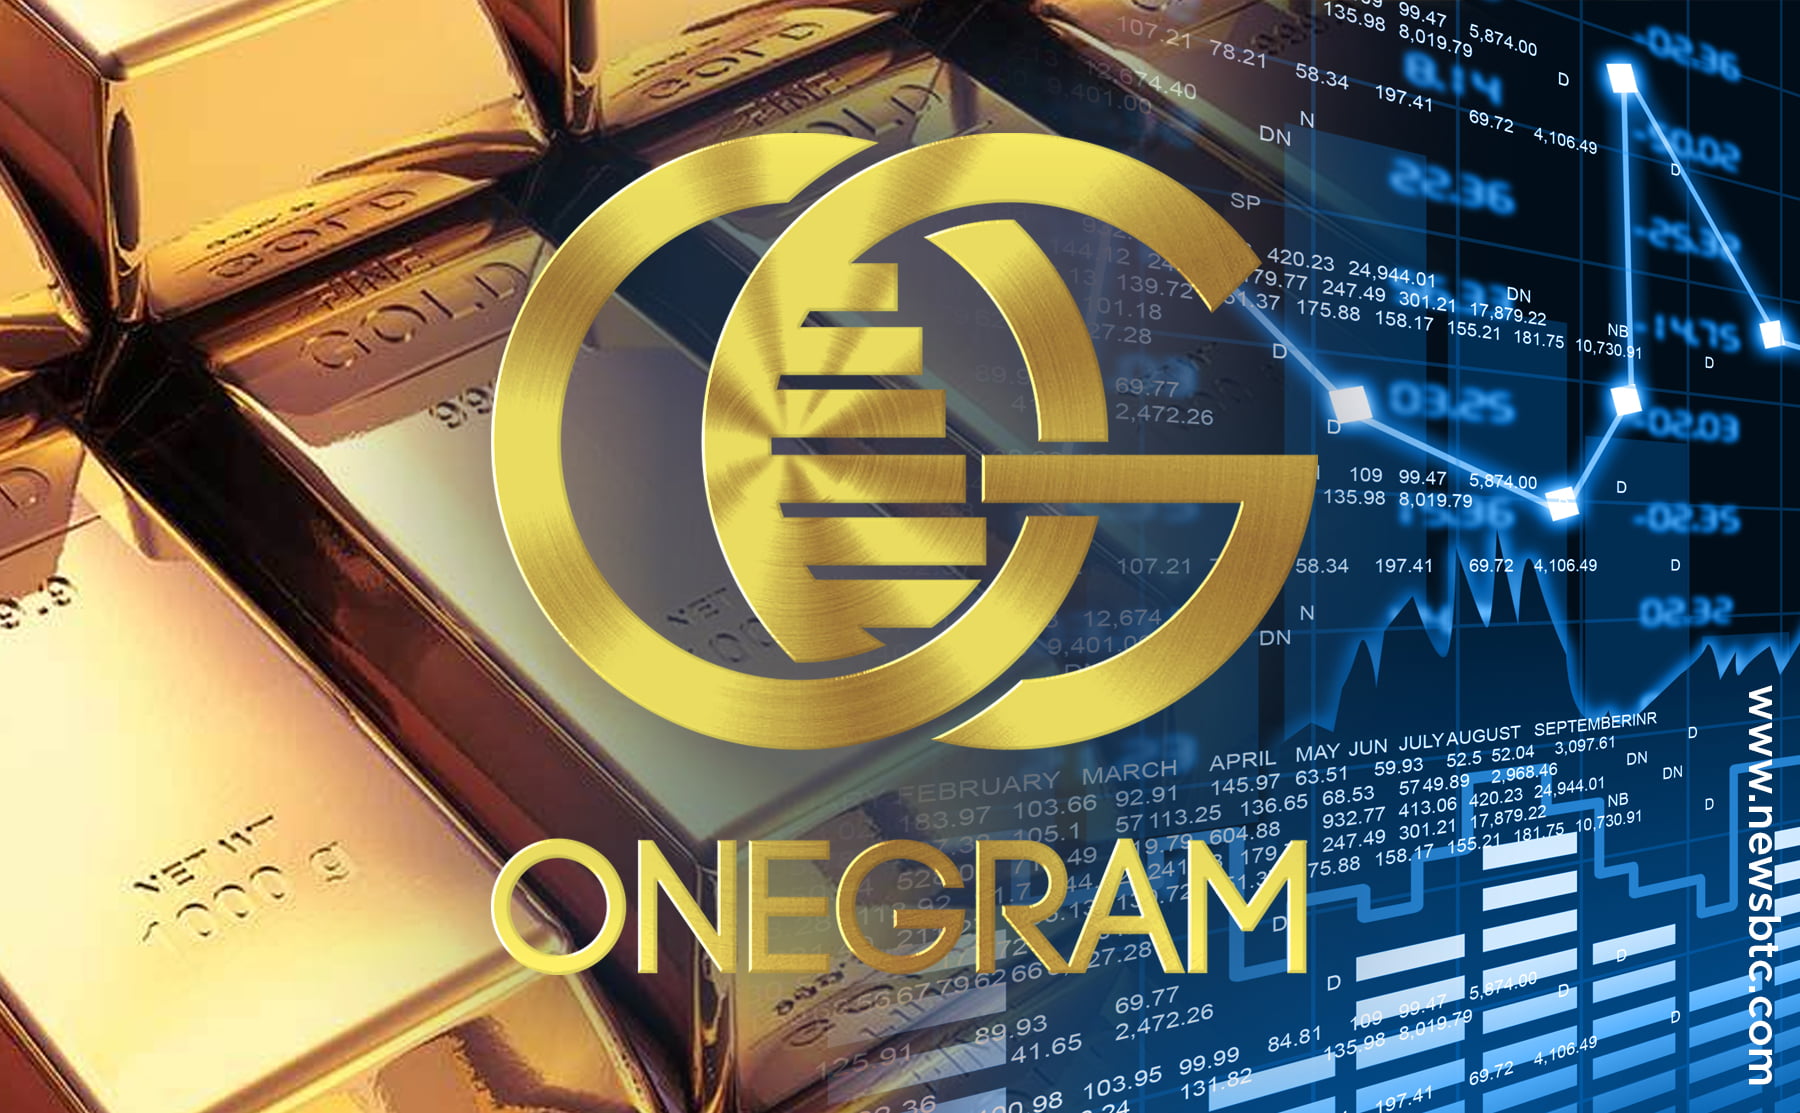 OneGram Cryptocurrency